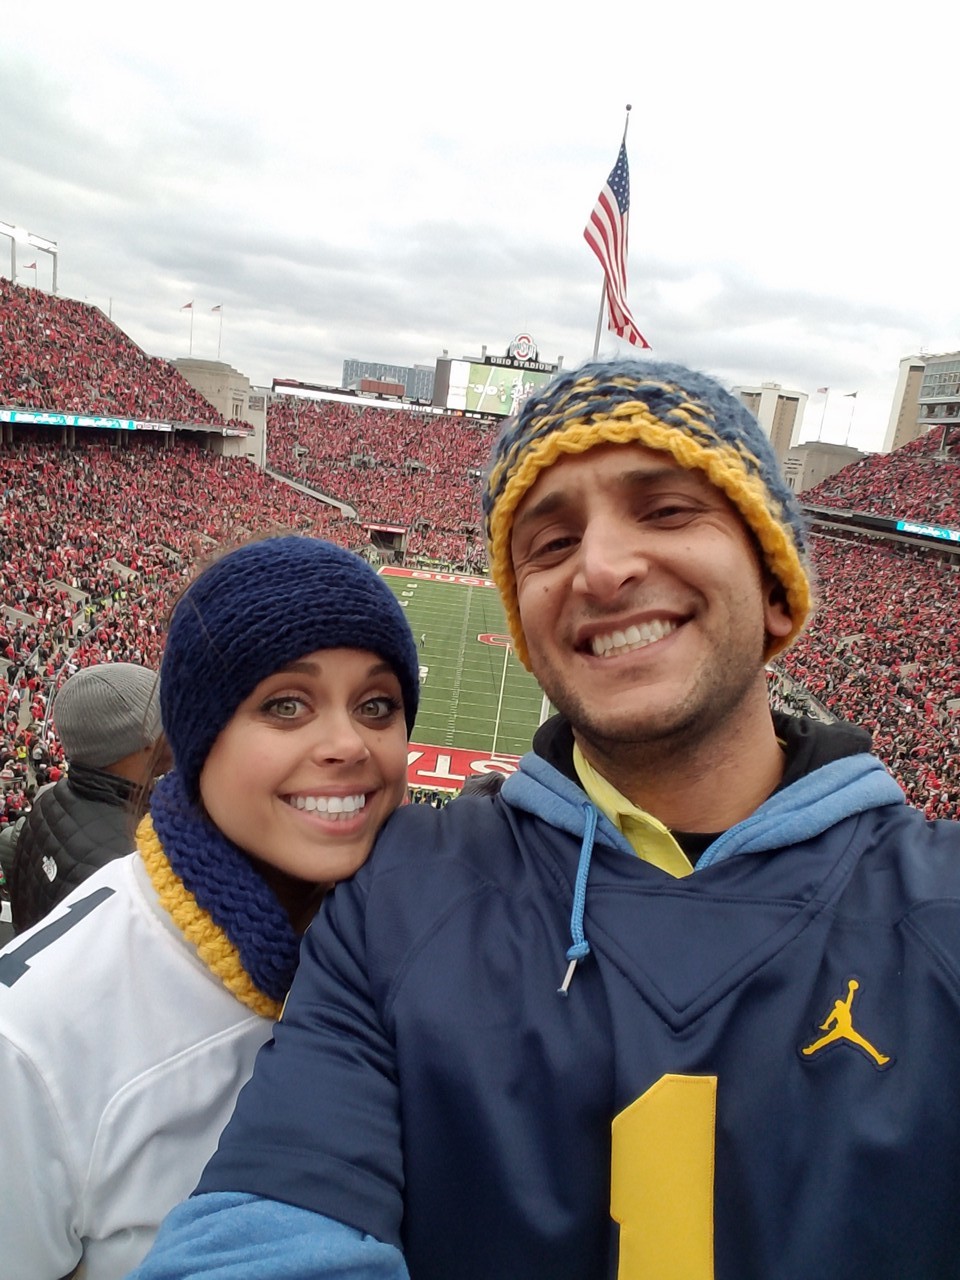 What do you do in a city where everyone hates you? Do you cower and not wear your alma mater's colors? Do you say, "May the best team win?" Or do you go full monty and floss your Michigan gear from head to toe?